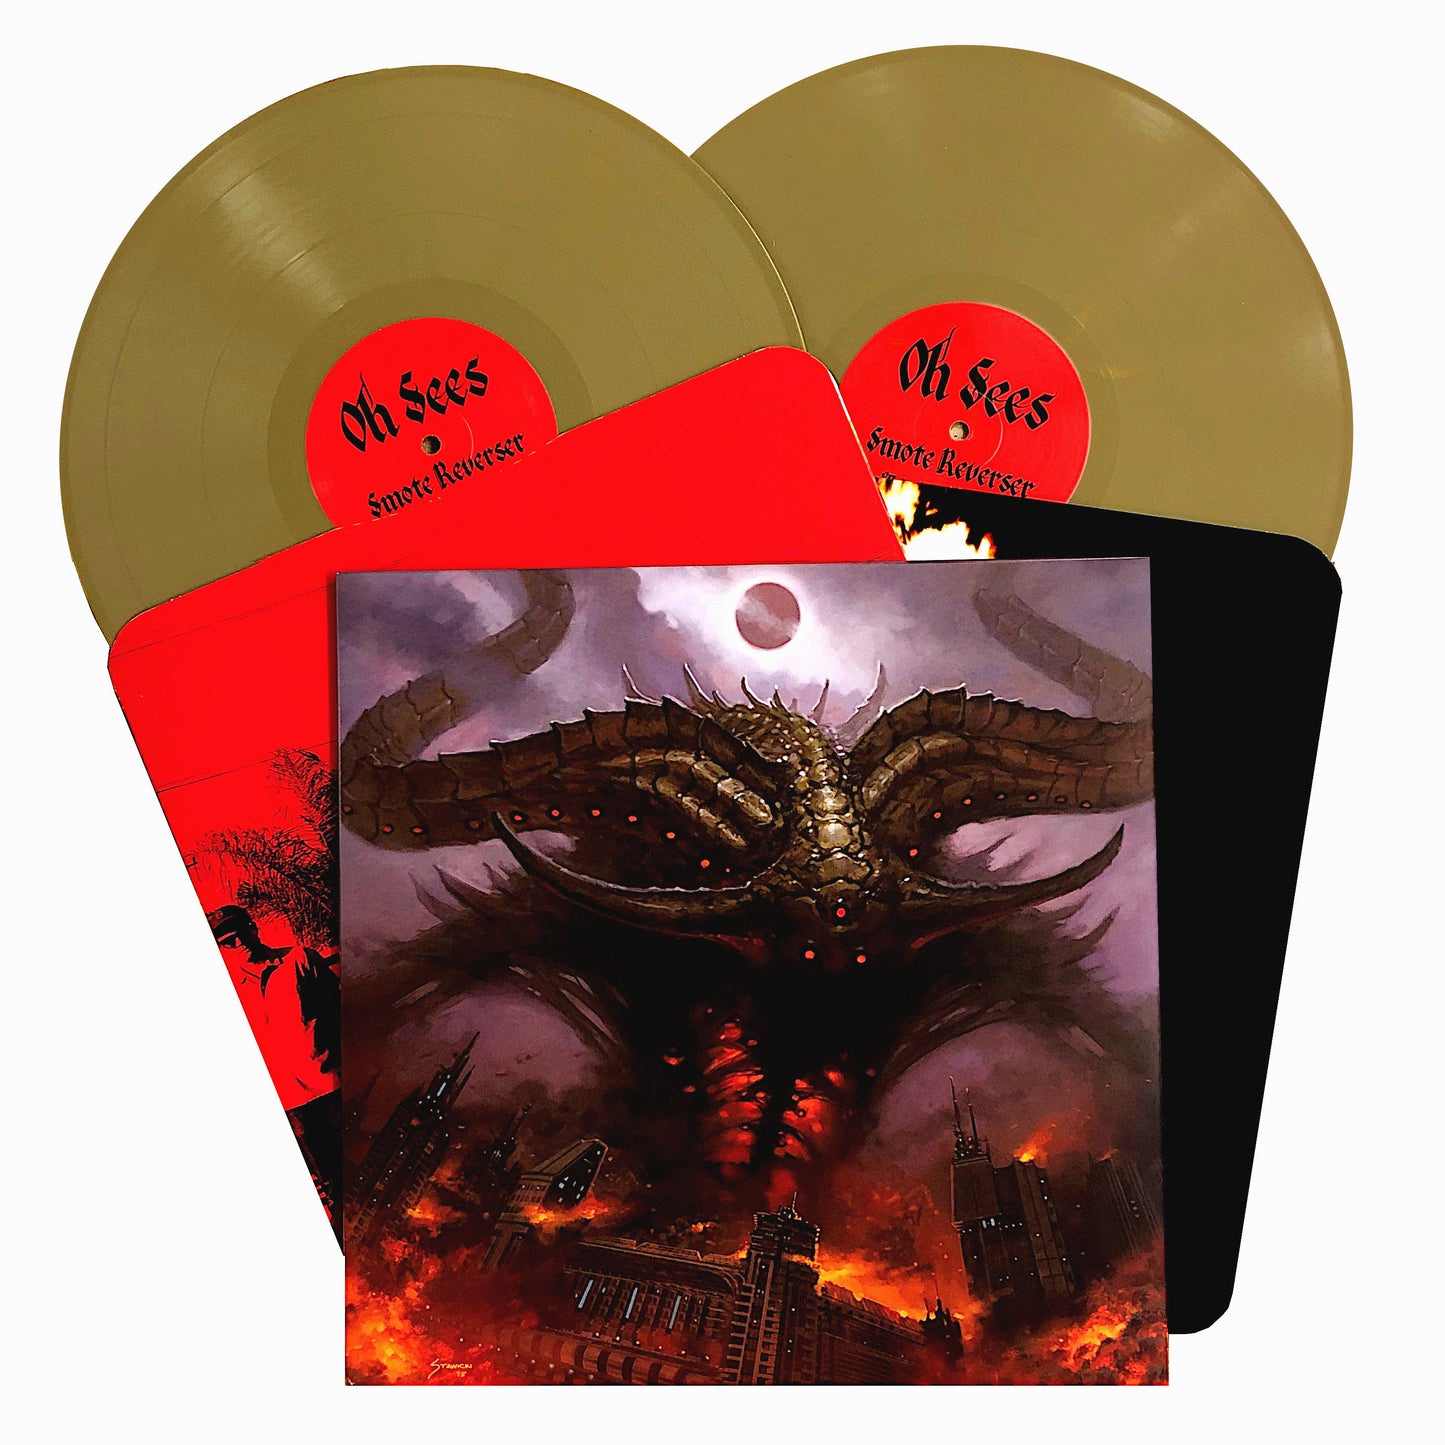 Oh Sees - Smote Reverser - Col. 2LP